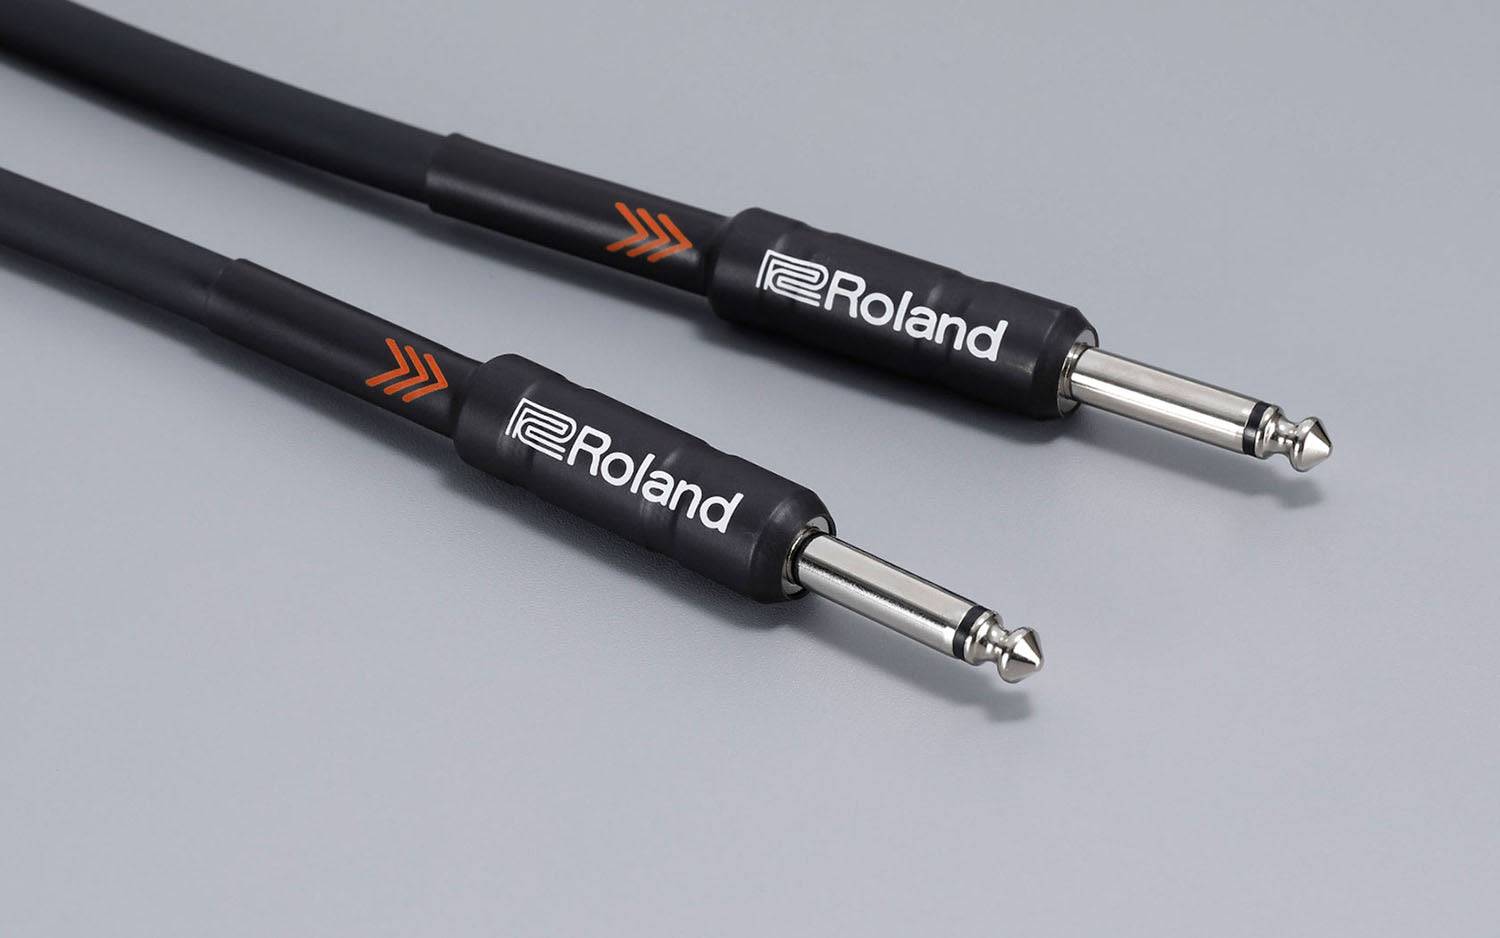 Roland RIC-B25, 25 Feet Long Black Series Instrument Cable, Straight 1/4-inch Connectors - Hollywood DJ